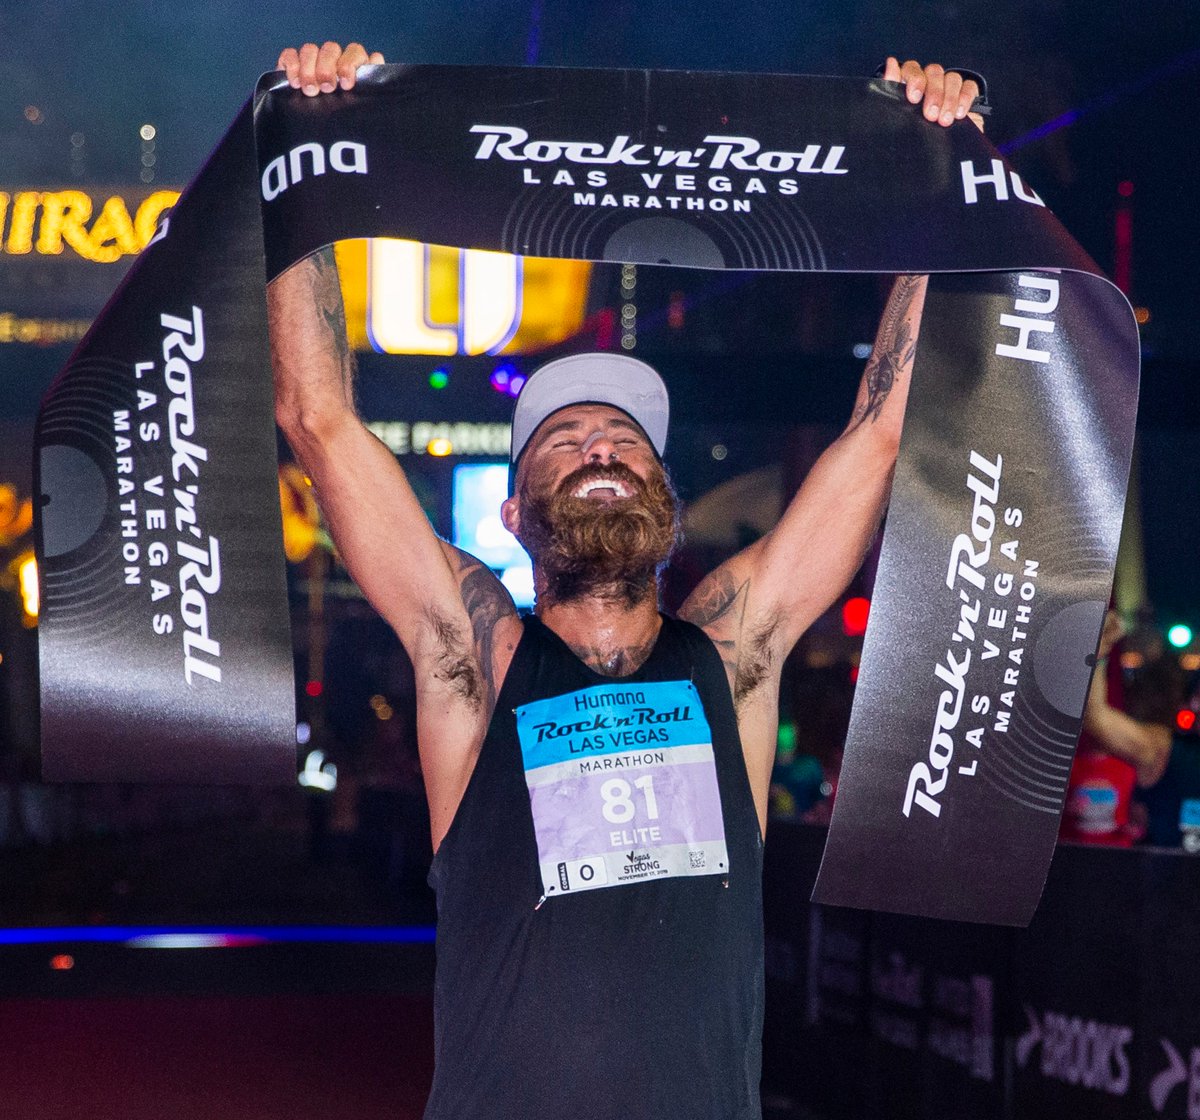 Congrats to the winners of the 2019 @RunRocknRoll marathon in Las Vegas. Visuals courtesy of @Left_Eye_Images and @Rookie__Rae #RnRVegas #StripAtNight